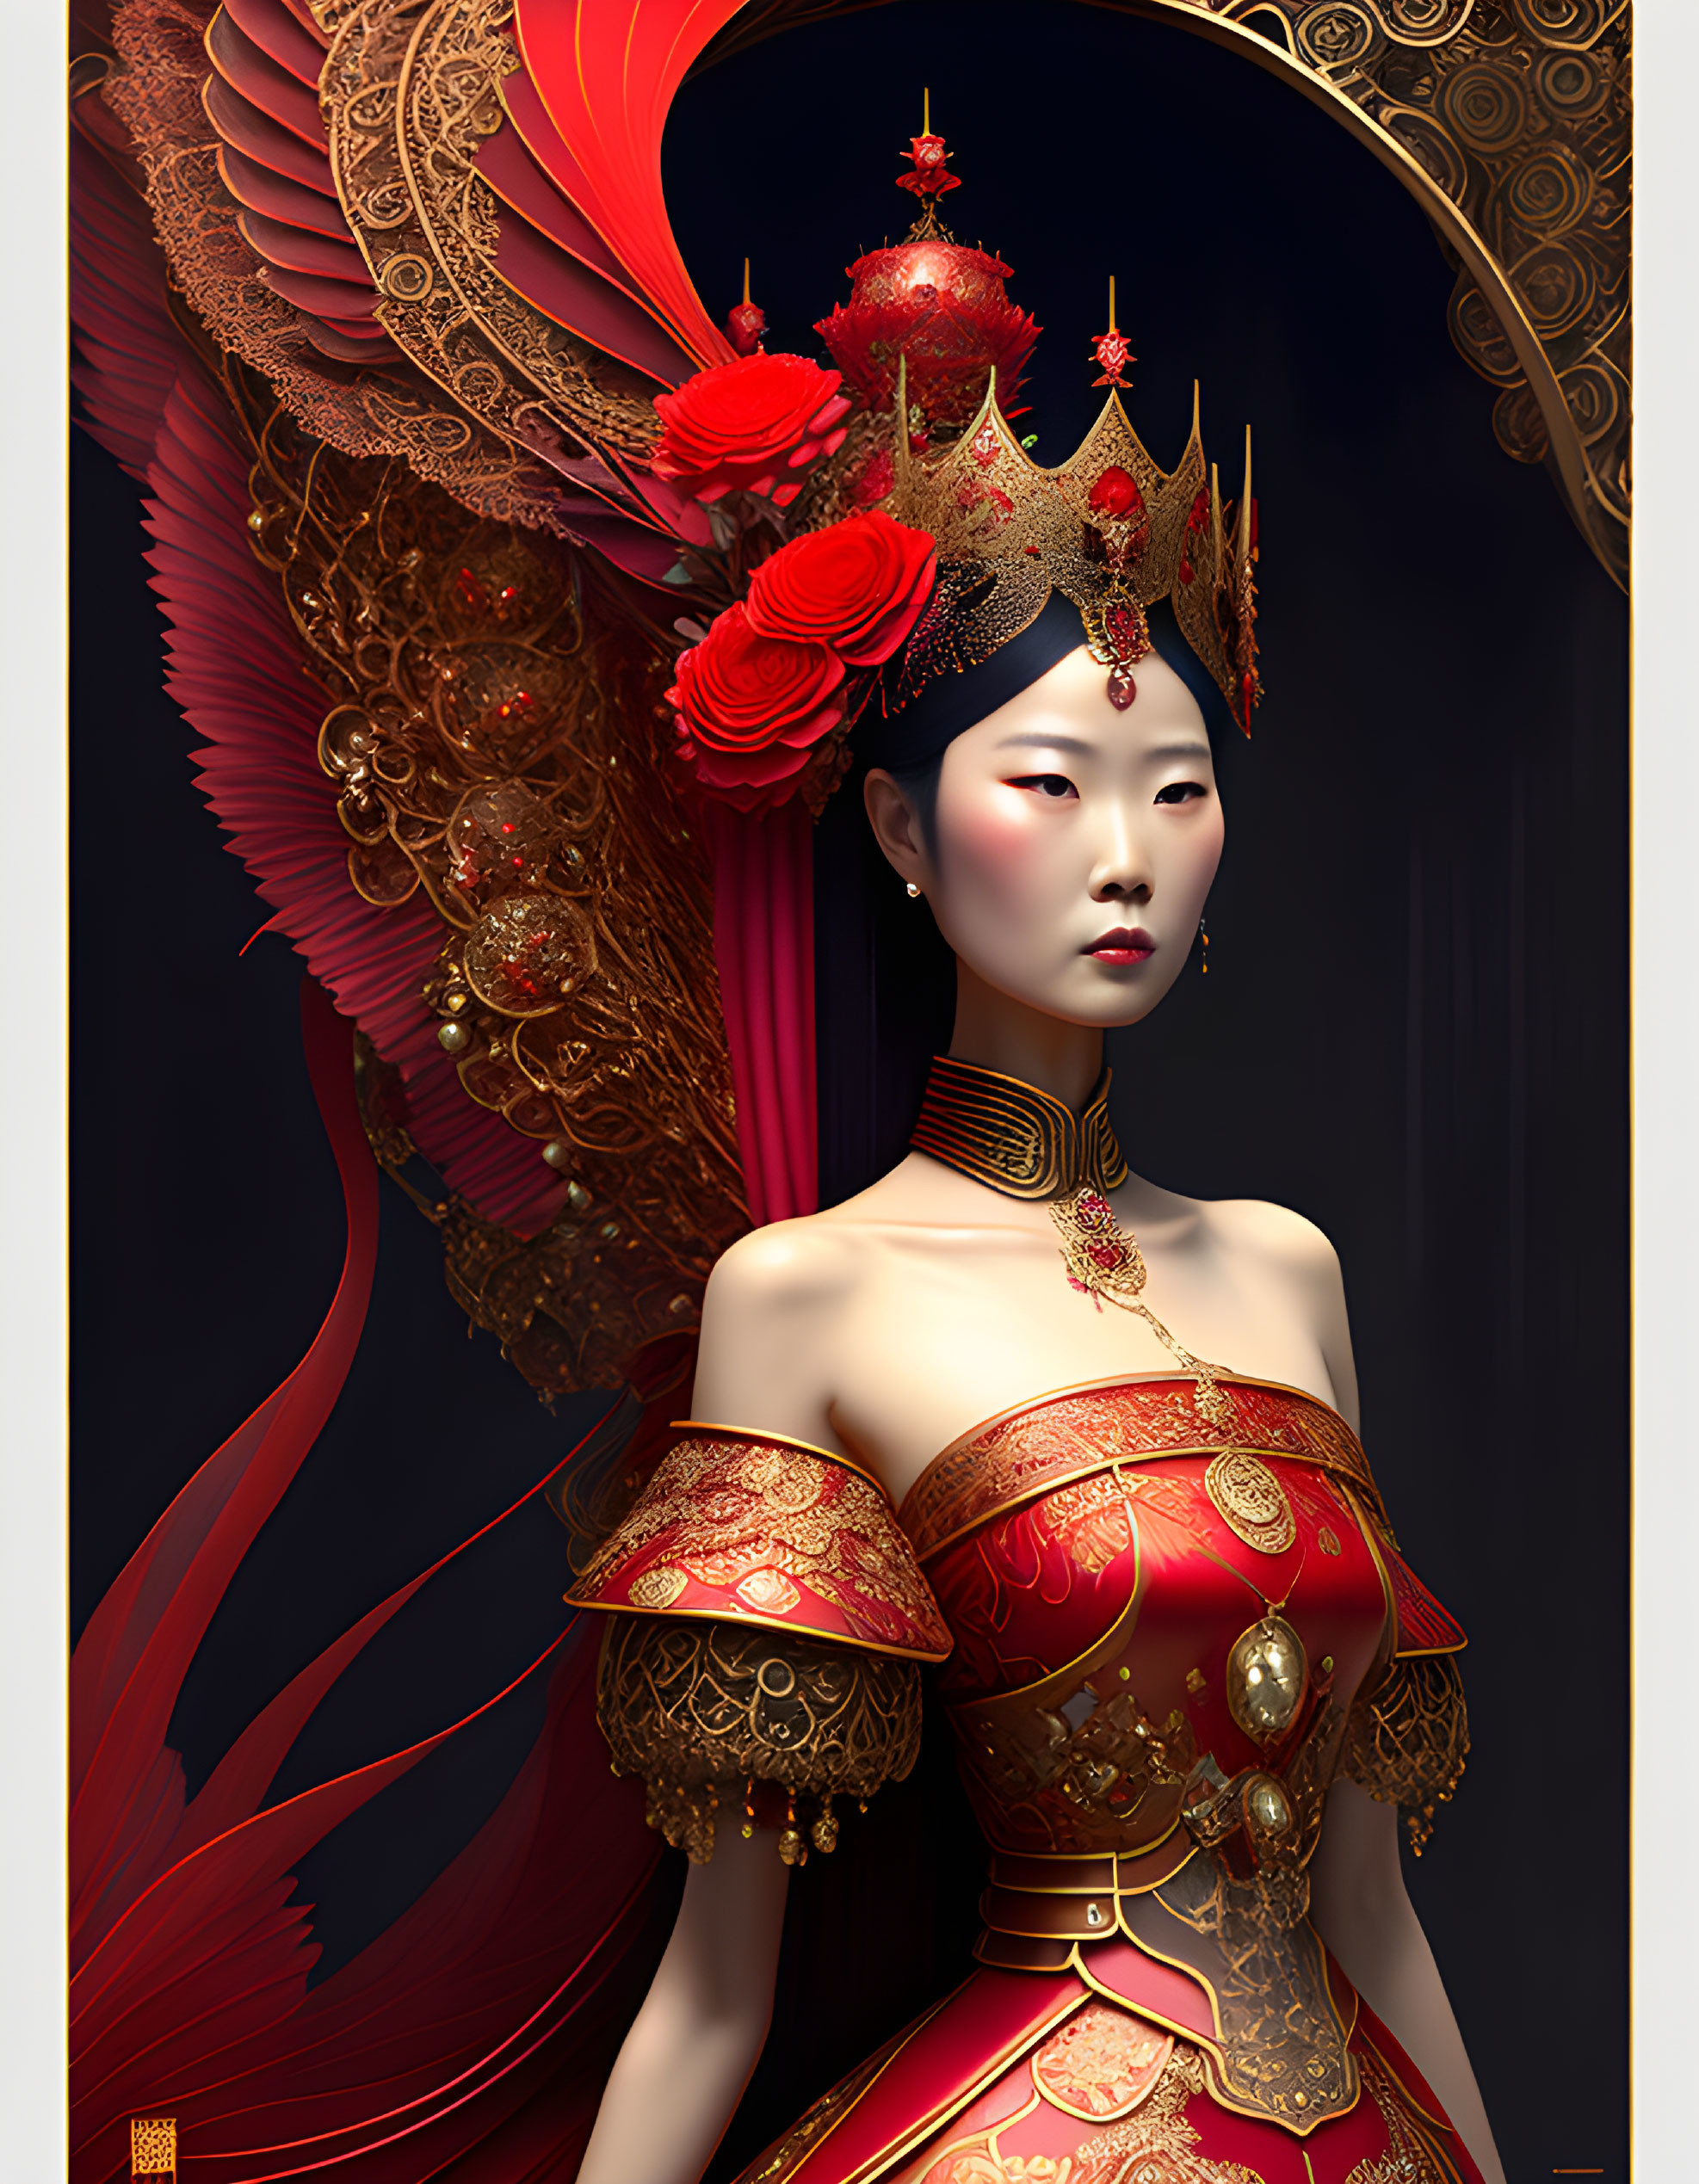 The Red Empress II.